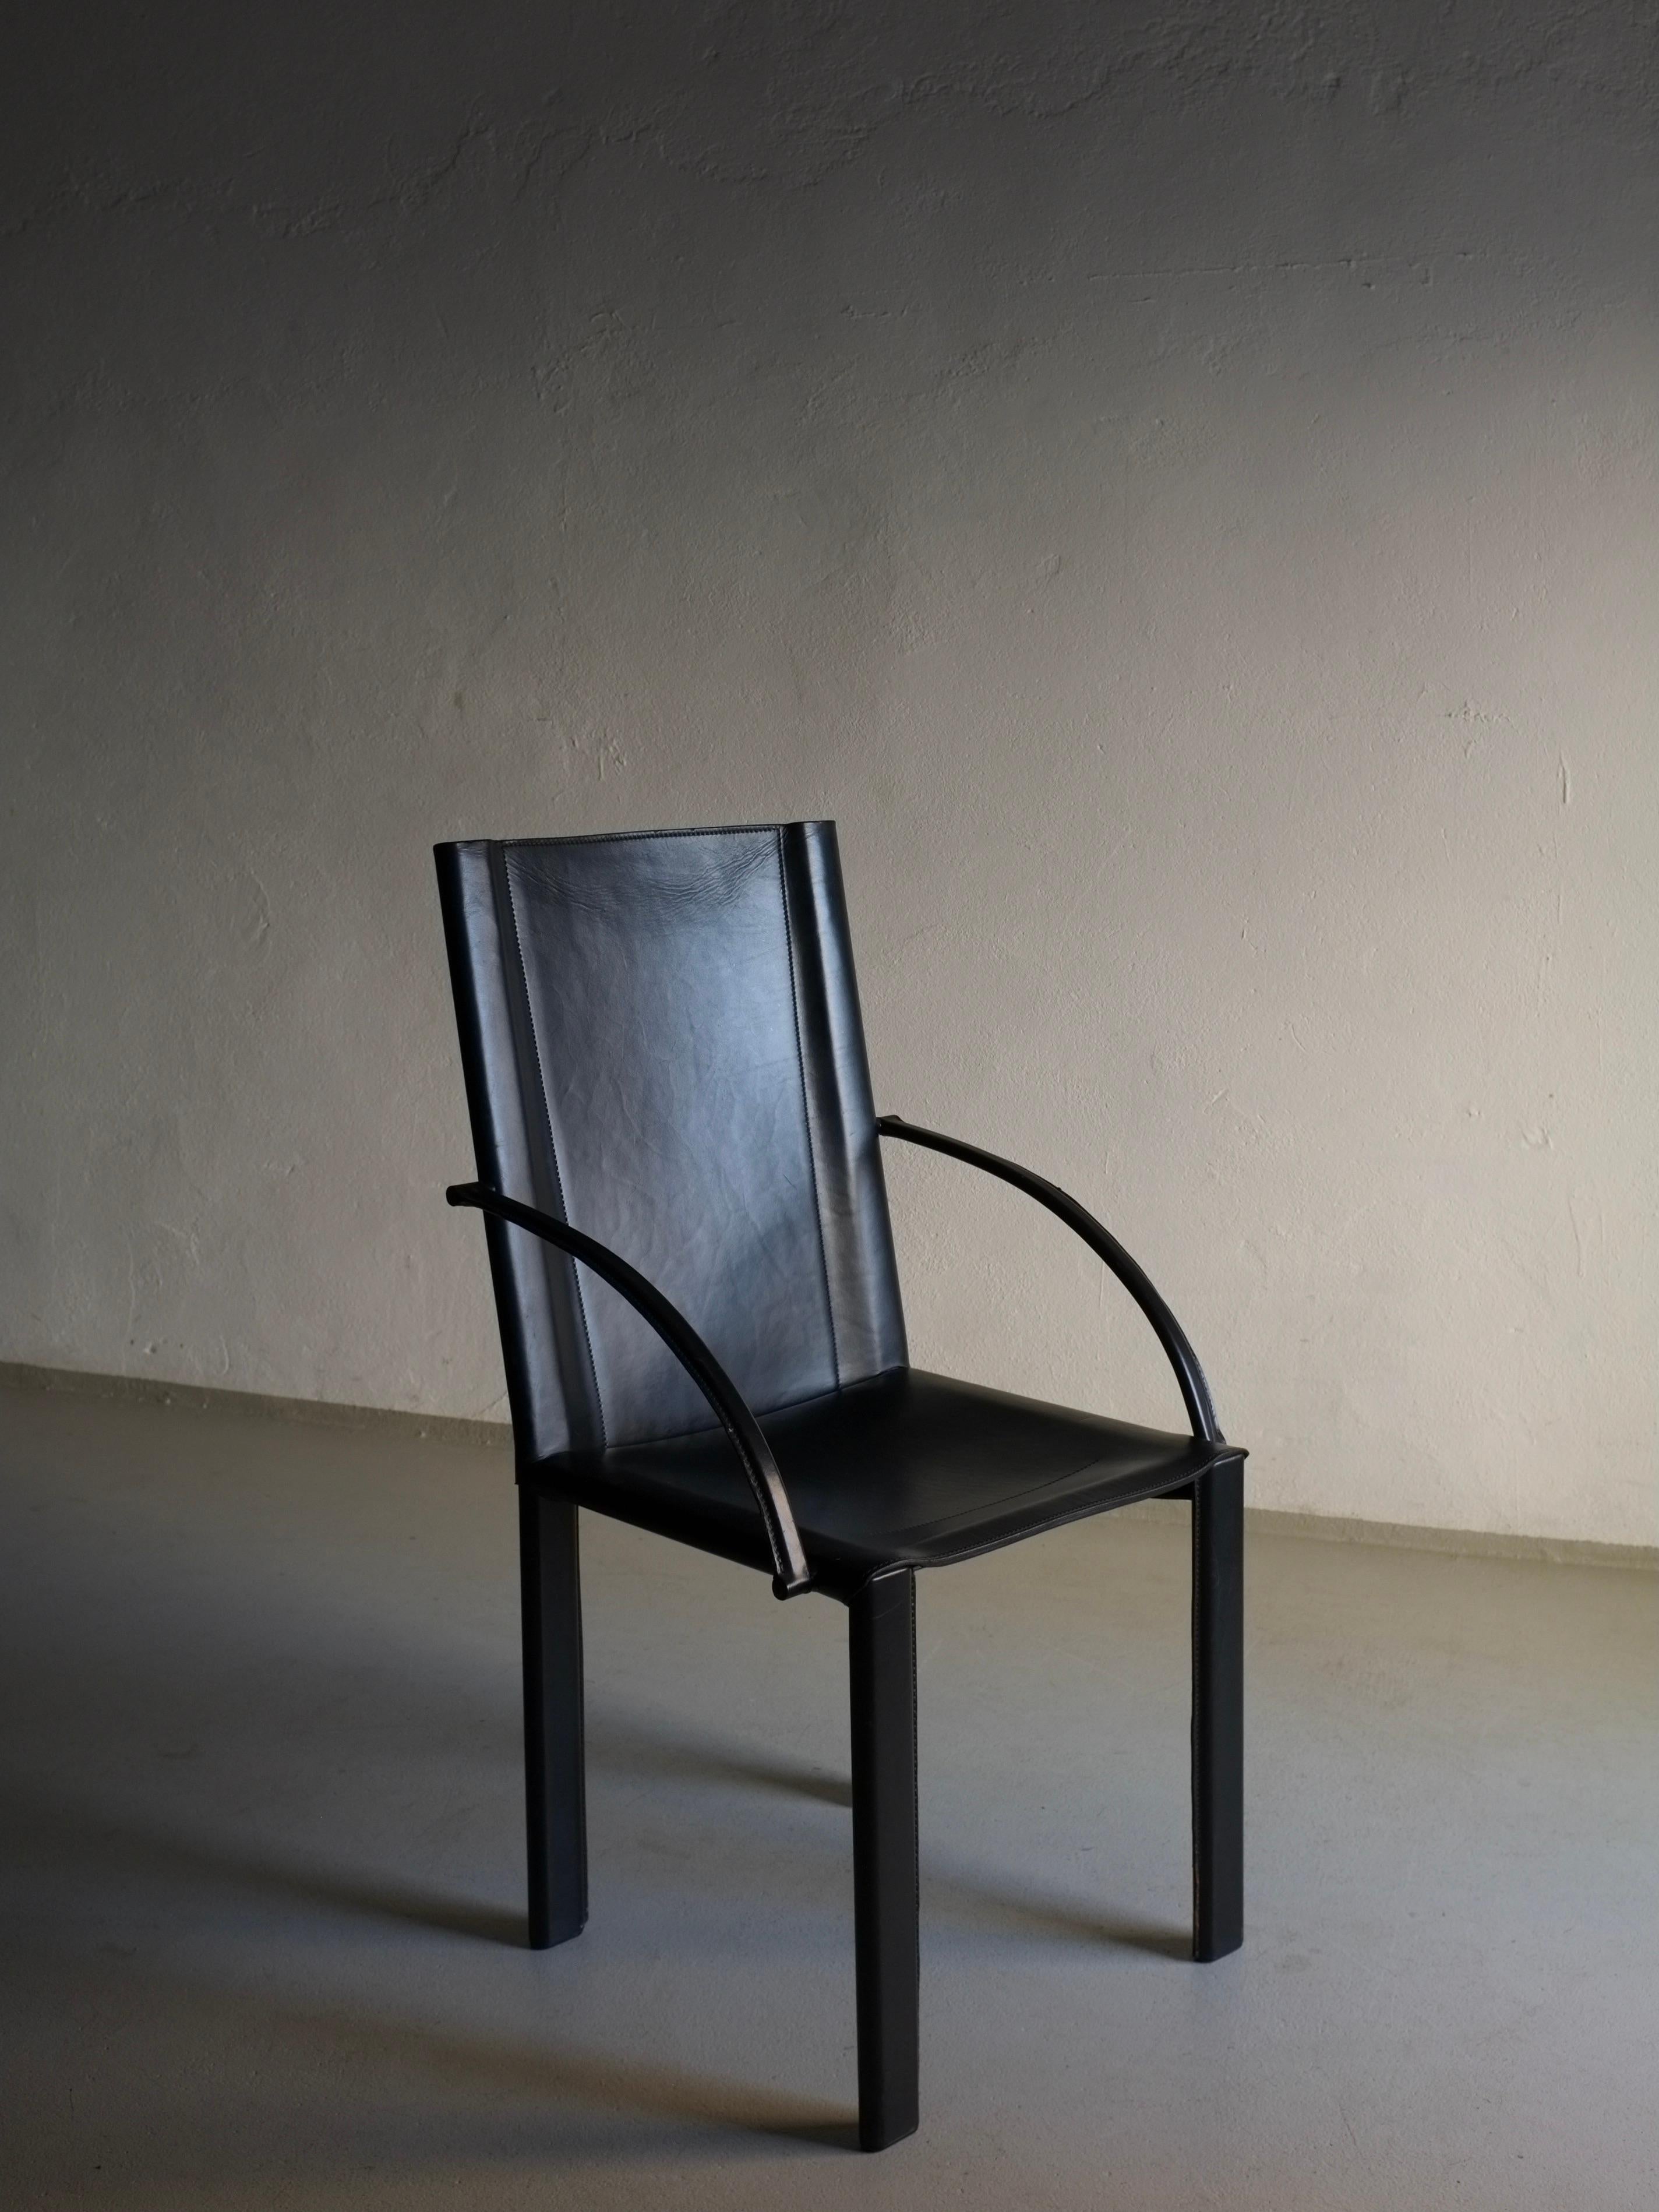 Vintage black leather armchair by Carlo Bartoli designed in the 1980s for Matteo Grassi. Very heavy because of the steel frame.

